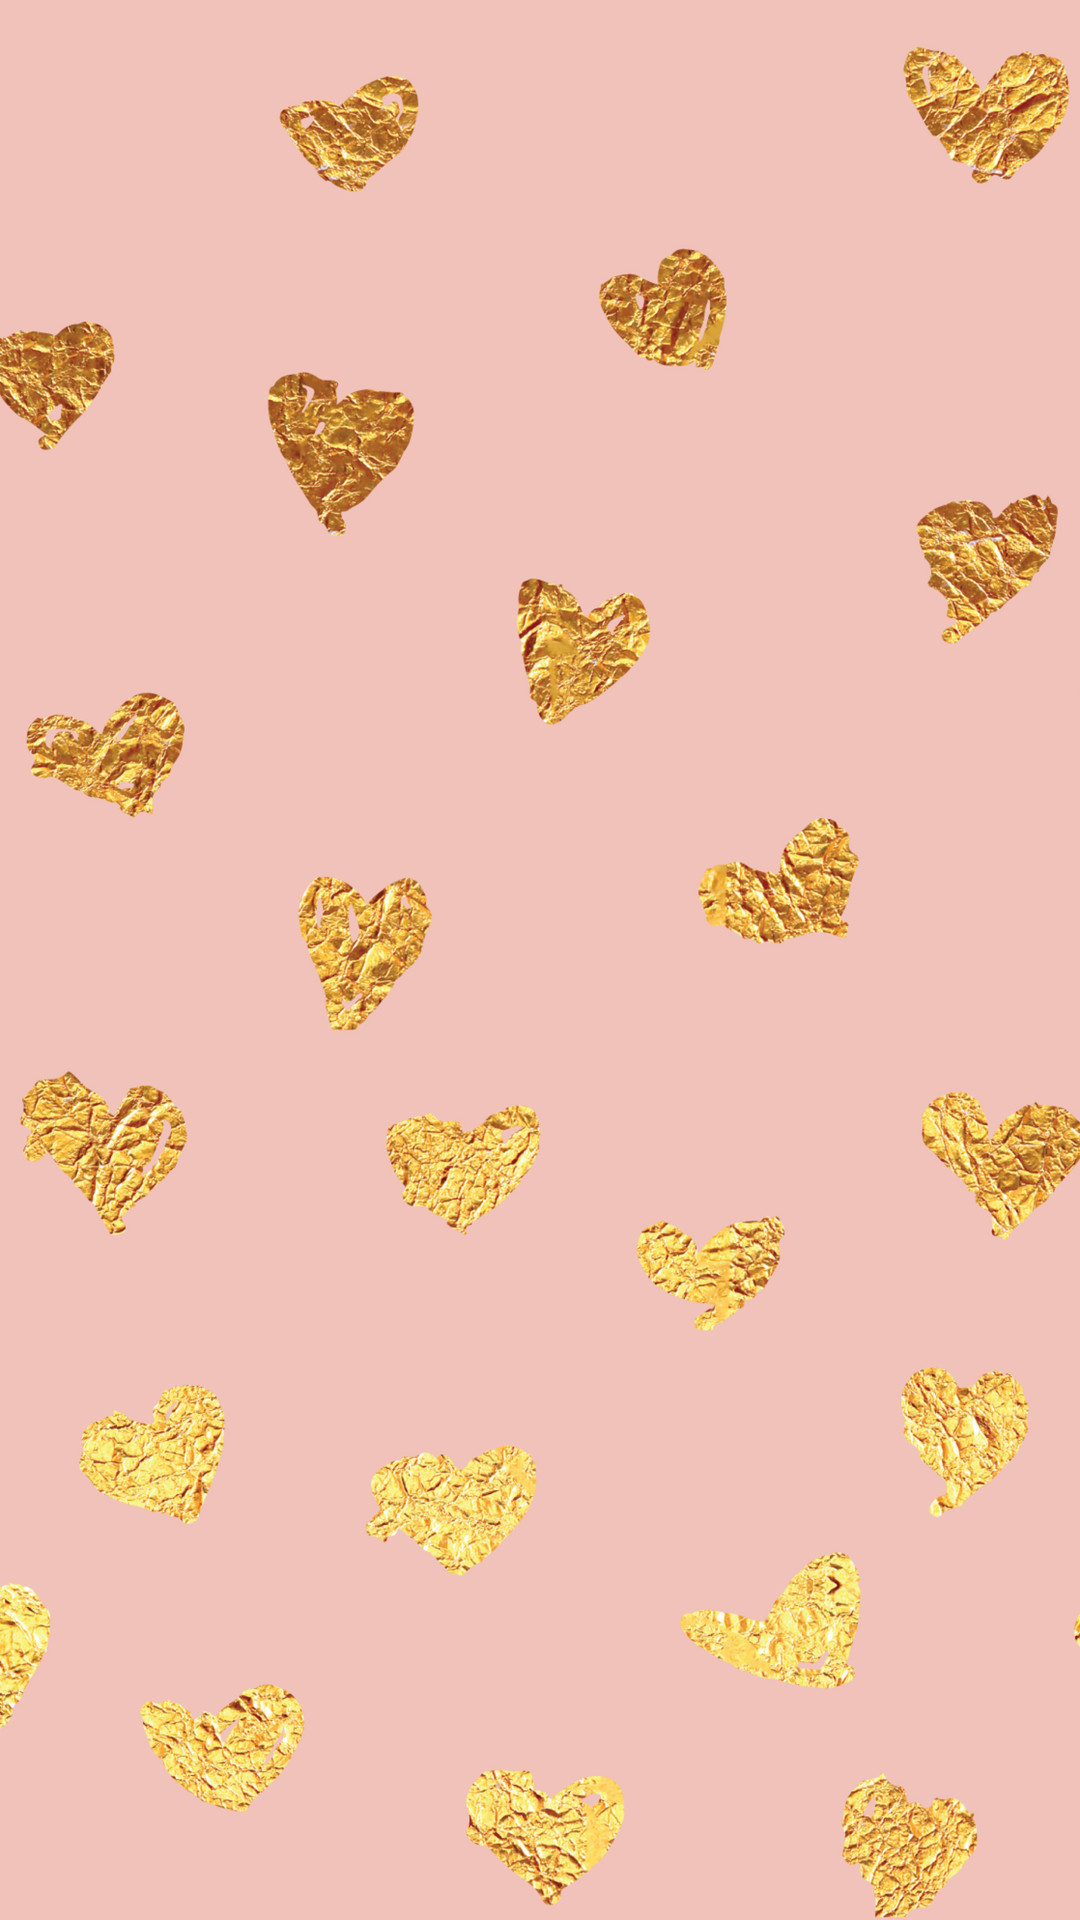 Gold Heart Pattern Iphone Wallpapers